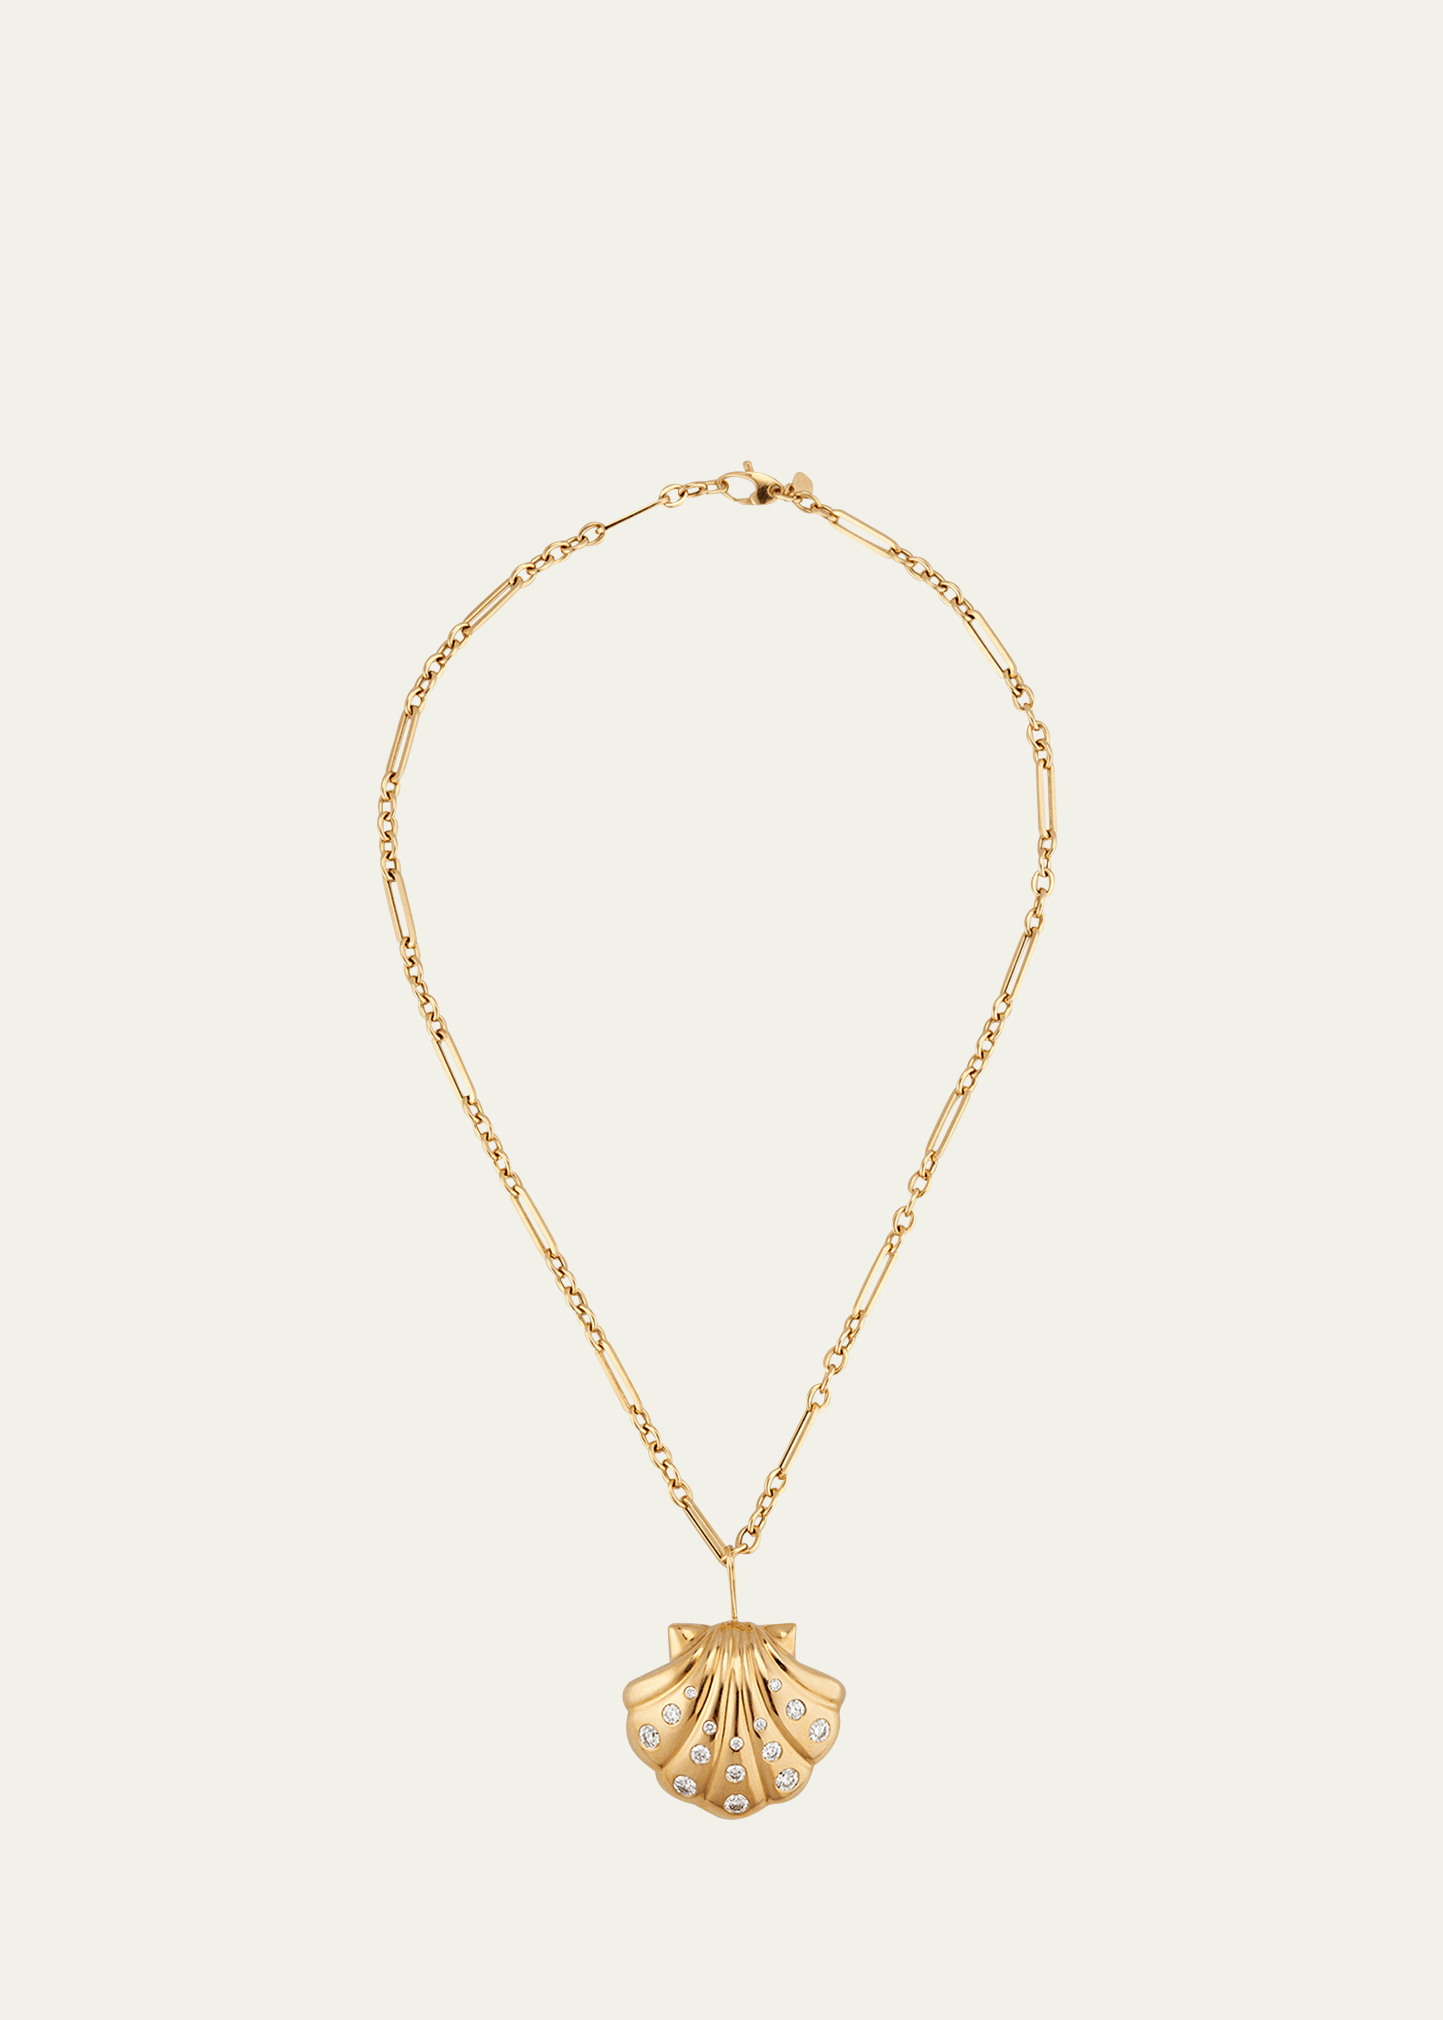 18K Yellow Gold Large Polished Shell Pendant Necklace with Diamonds